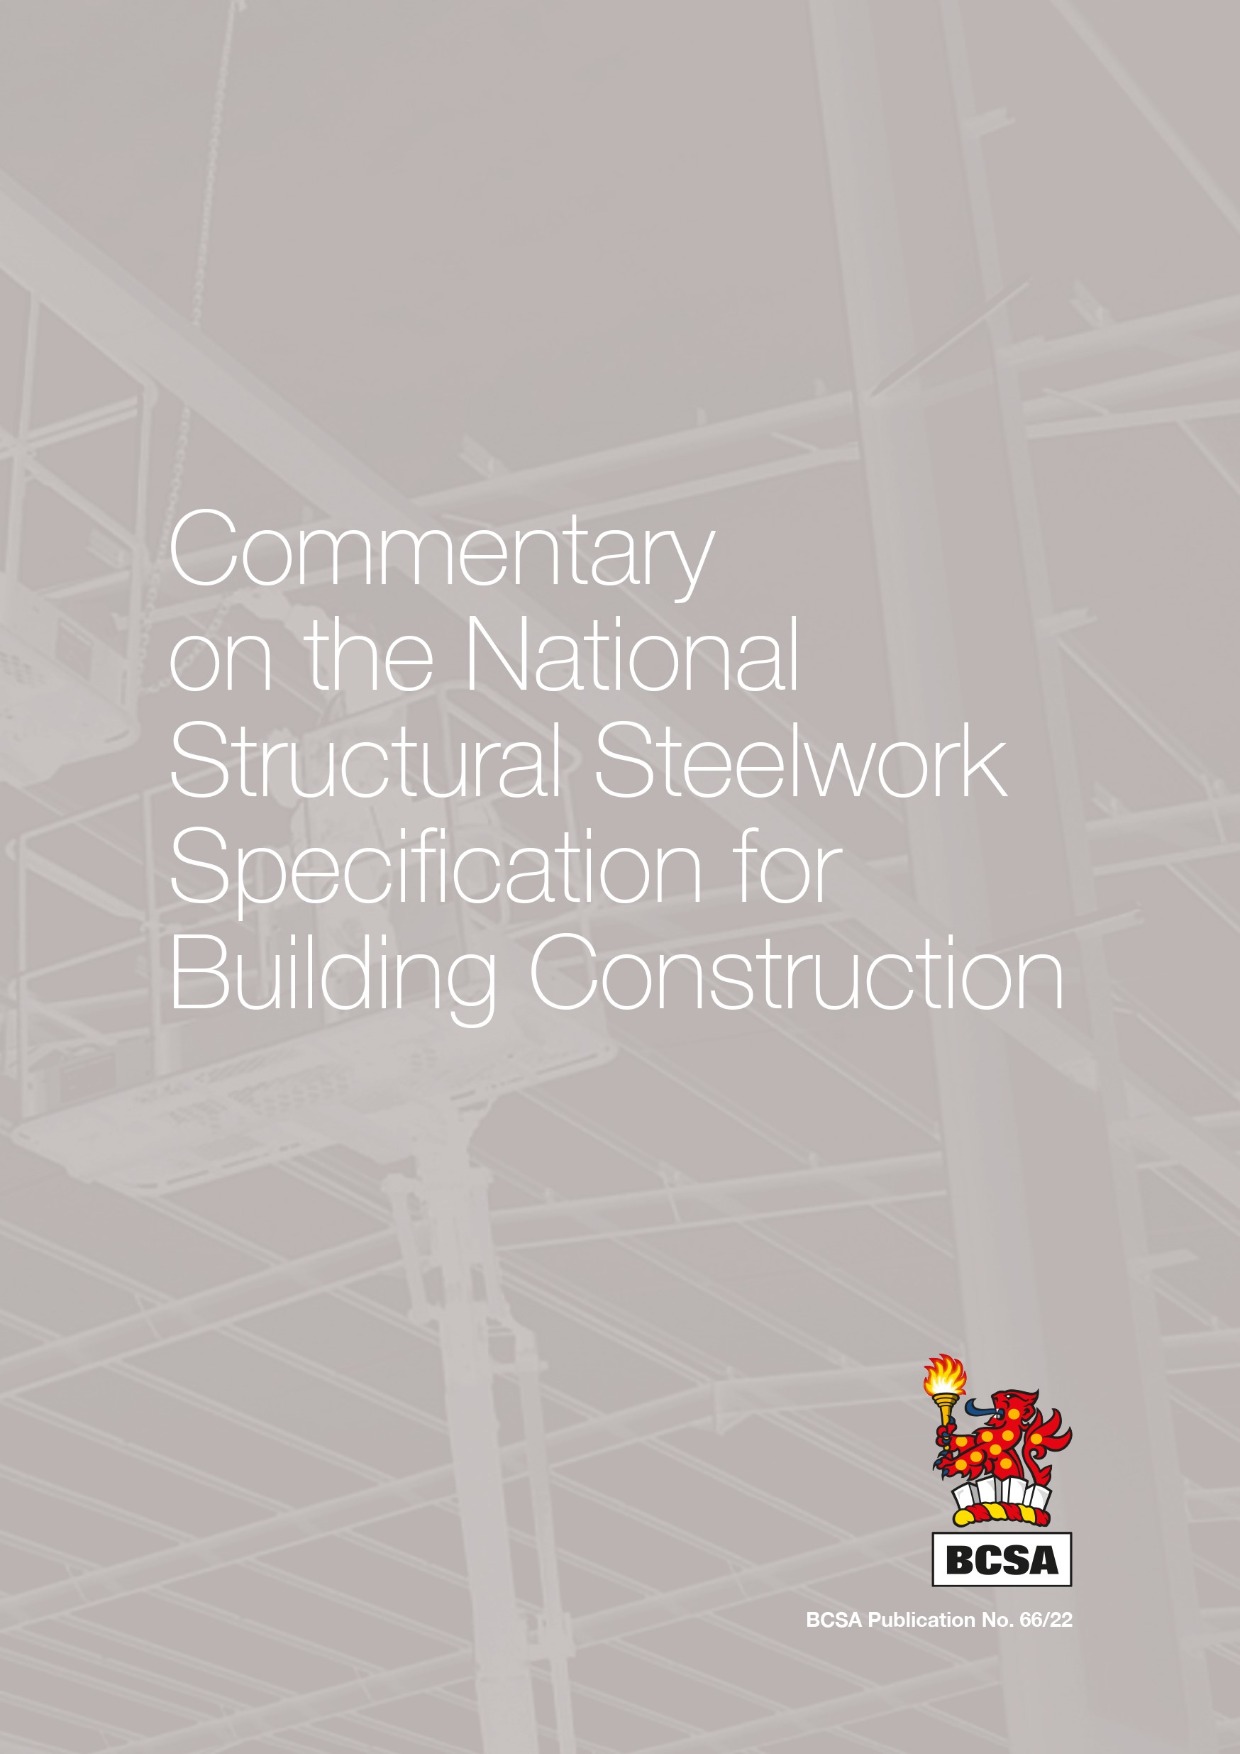 Commentary (3rd edition) on the National Structural Steelwork Specification for Building Construction 7th edition (PDF)